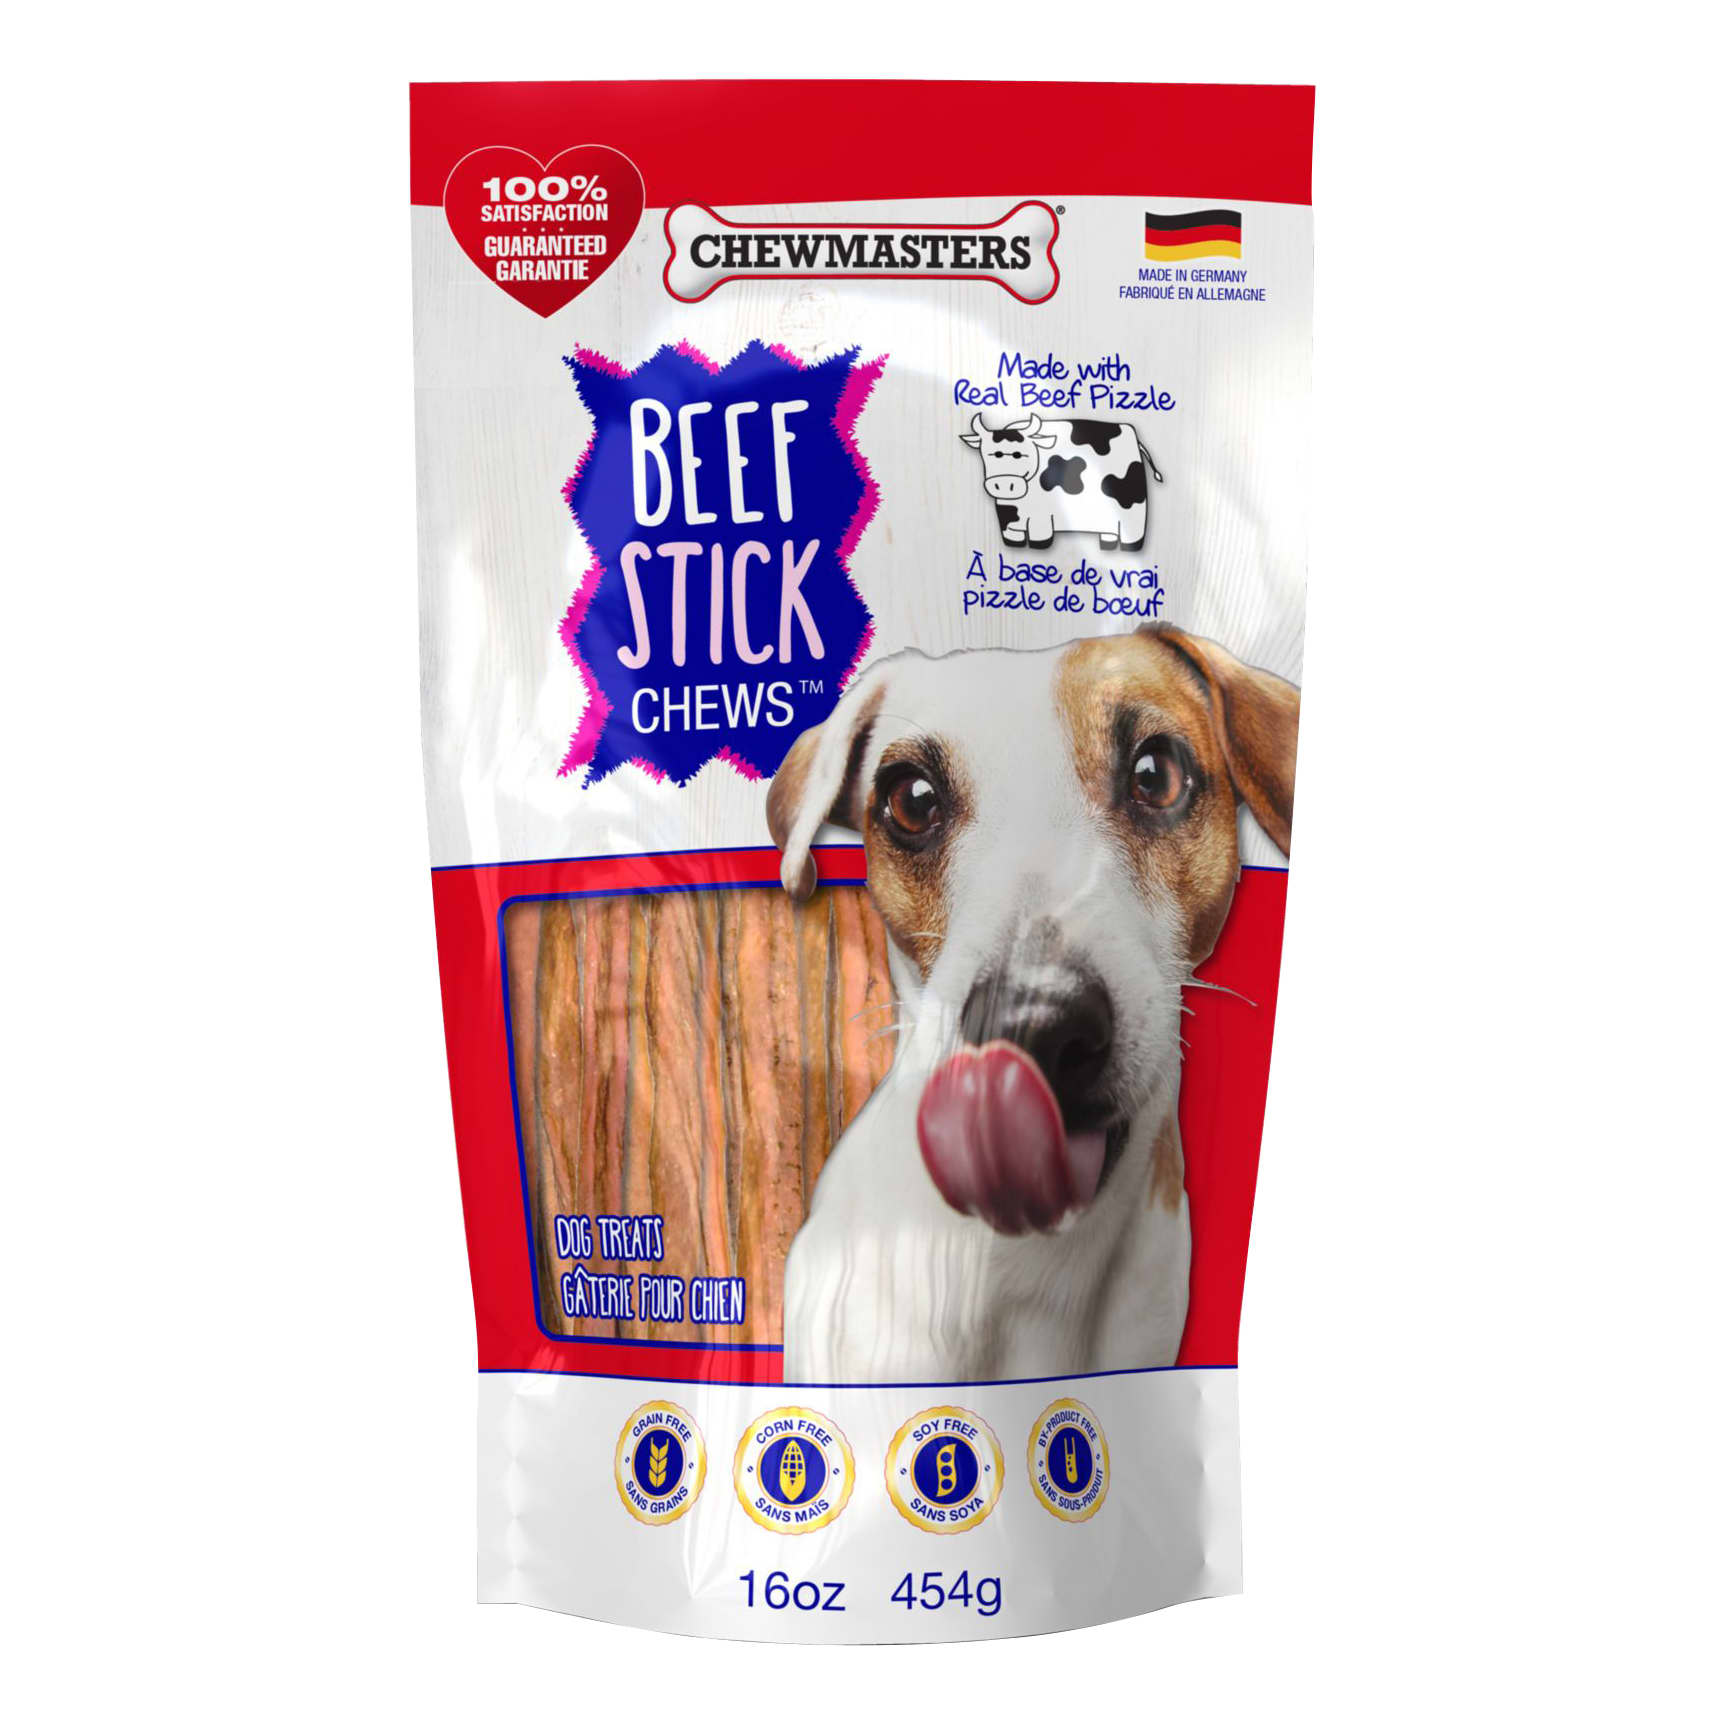 Chewmasters Beef Stick Chews